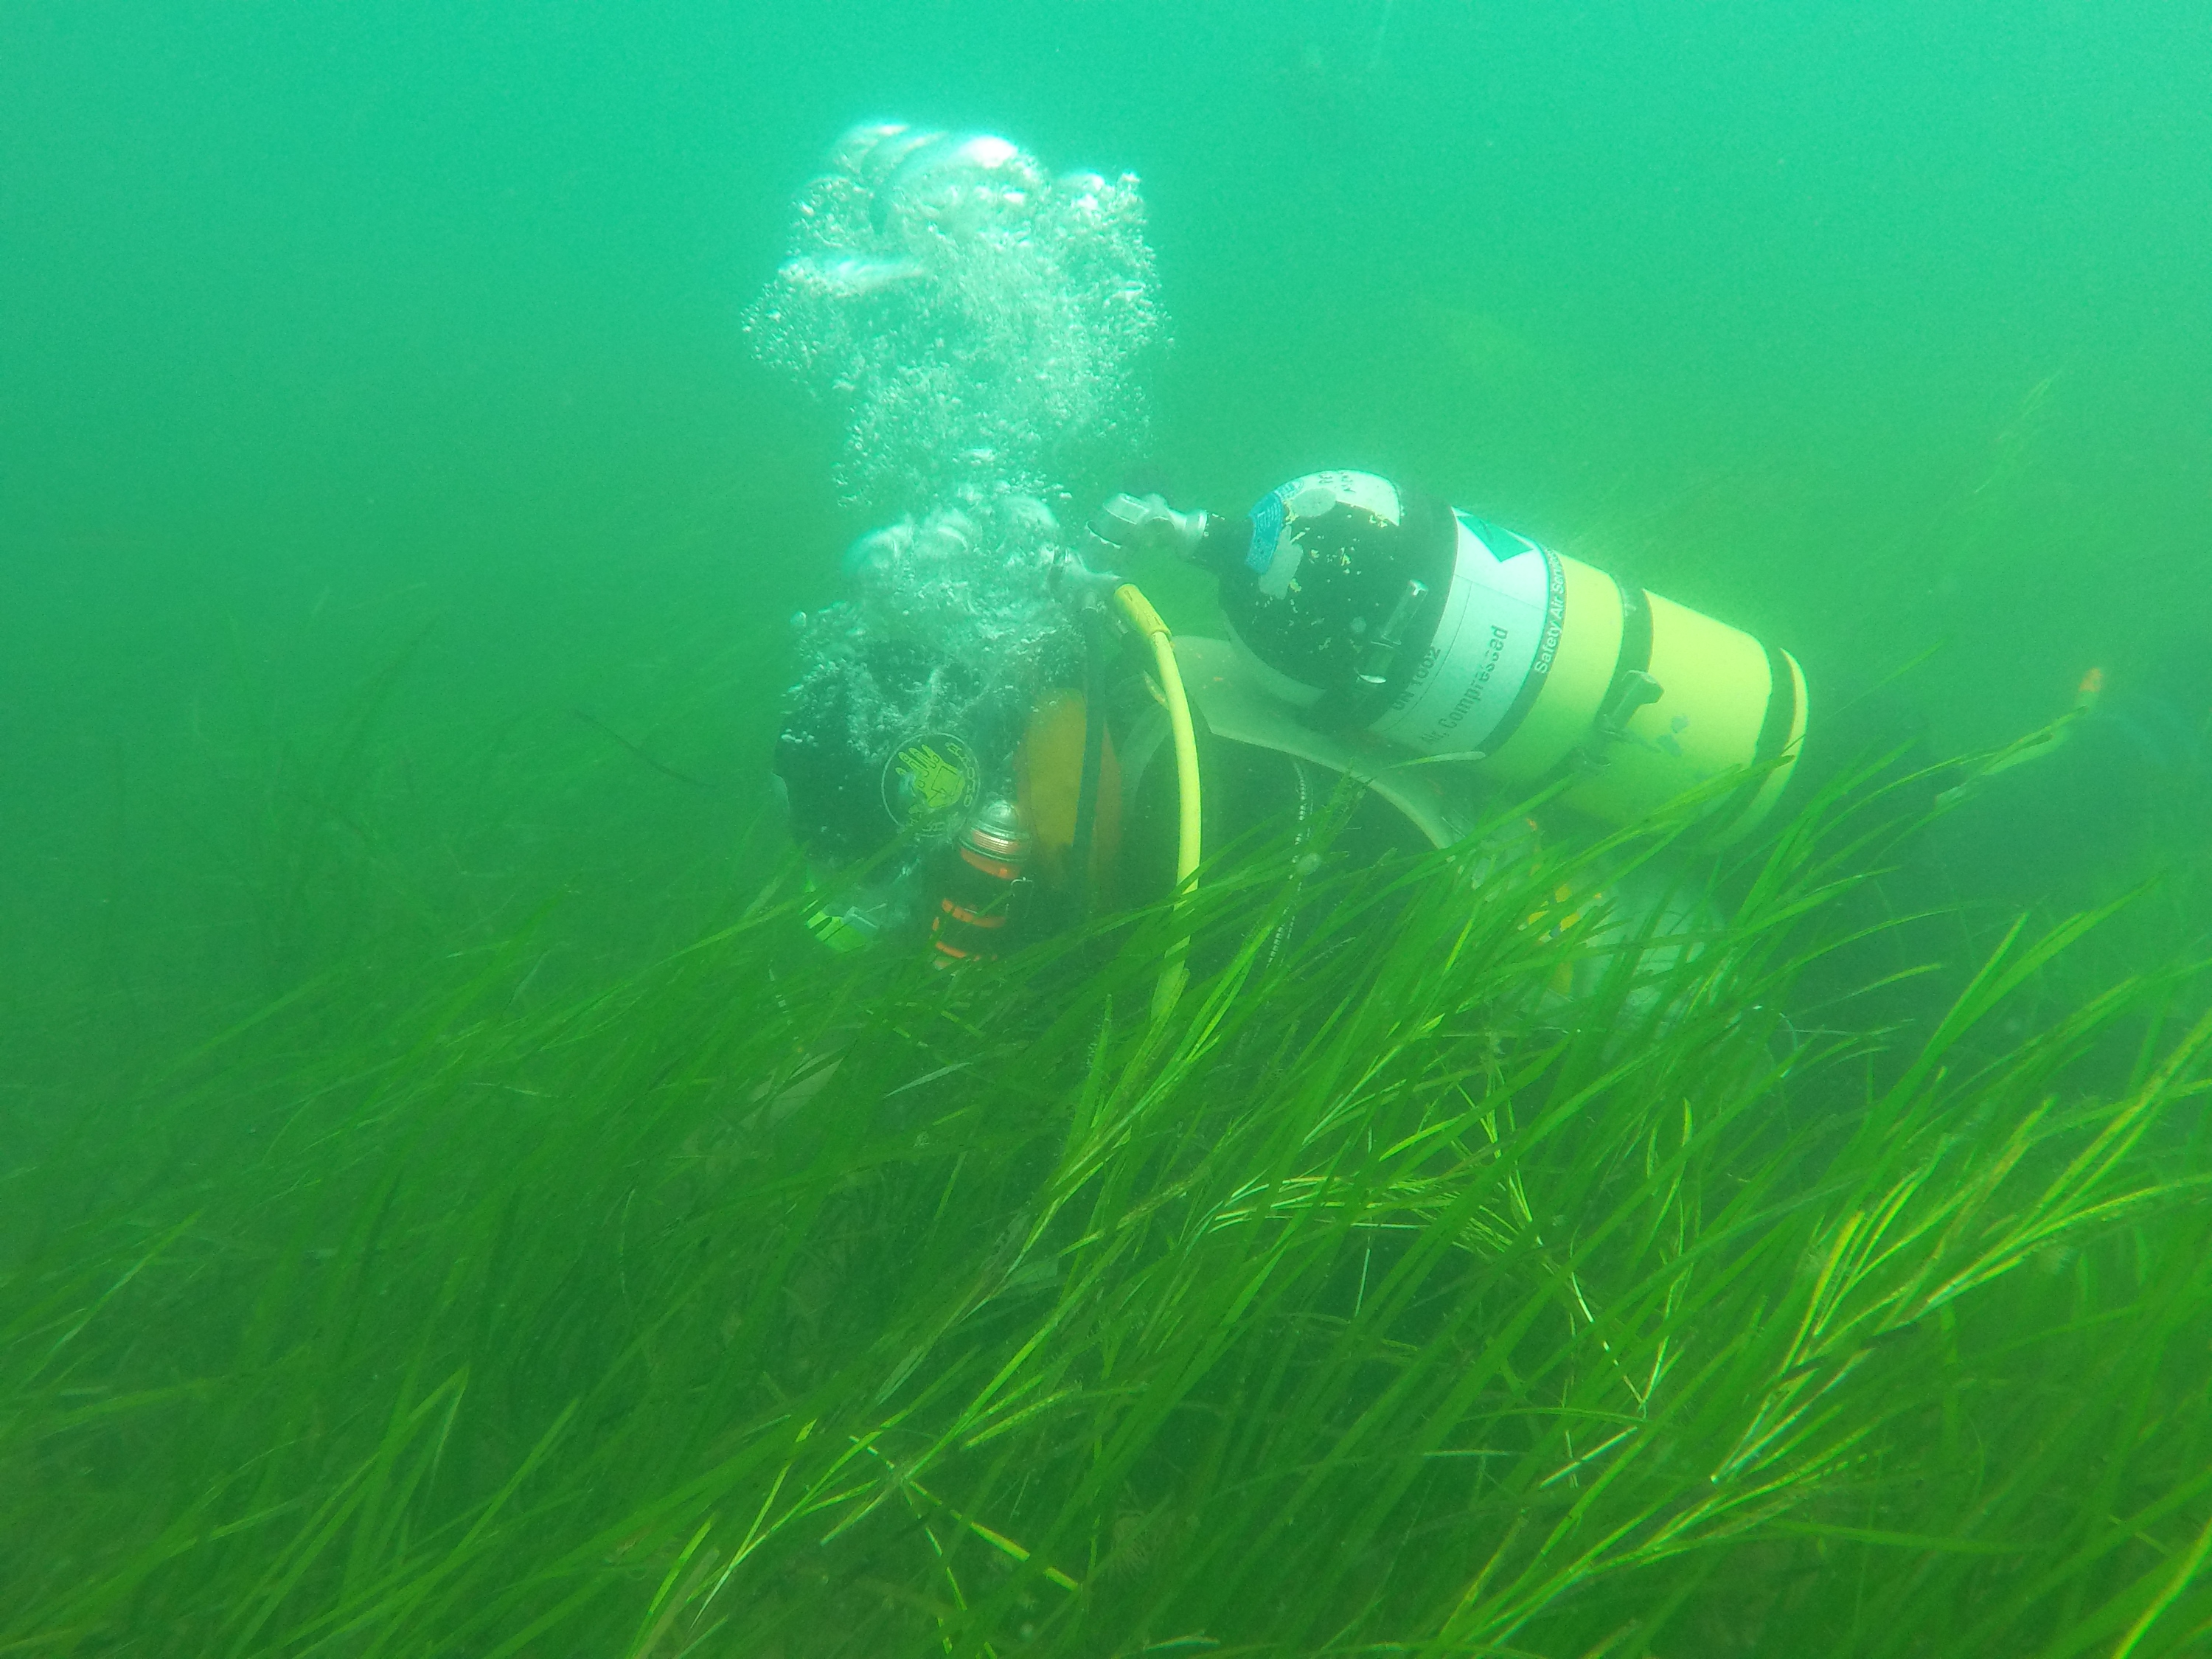 Underwater diver on the seagrass bed at Studland